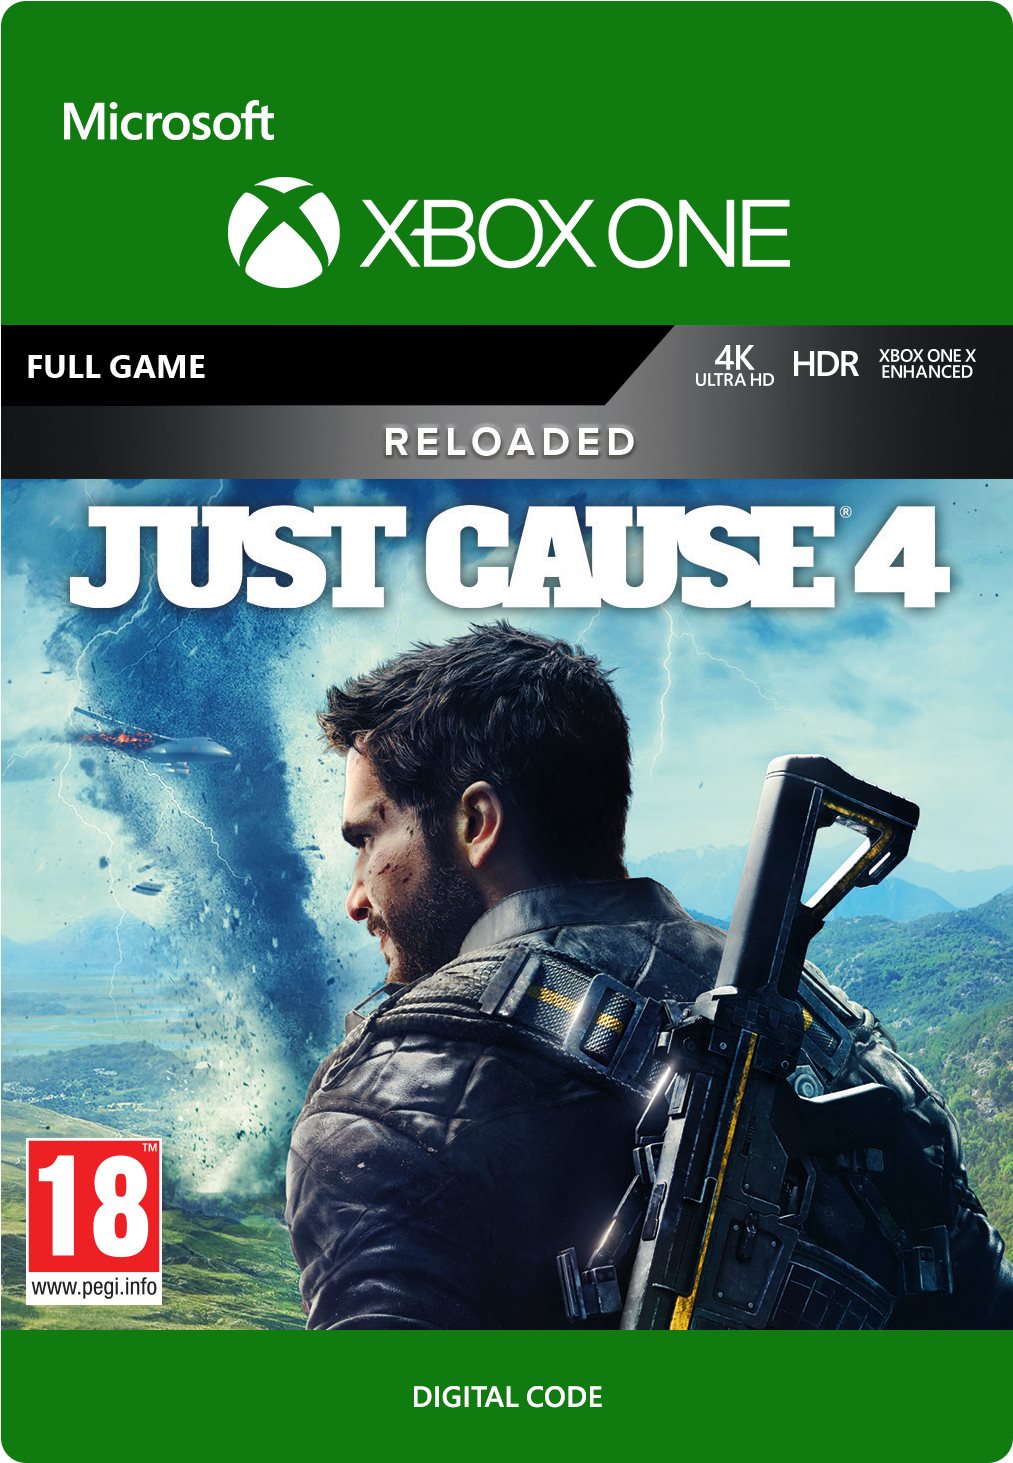 Just Cause 4 Reloaded Edition - Xbox DIGITAL